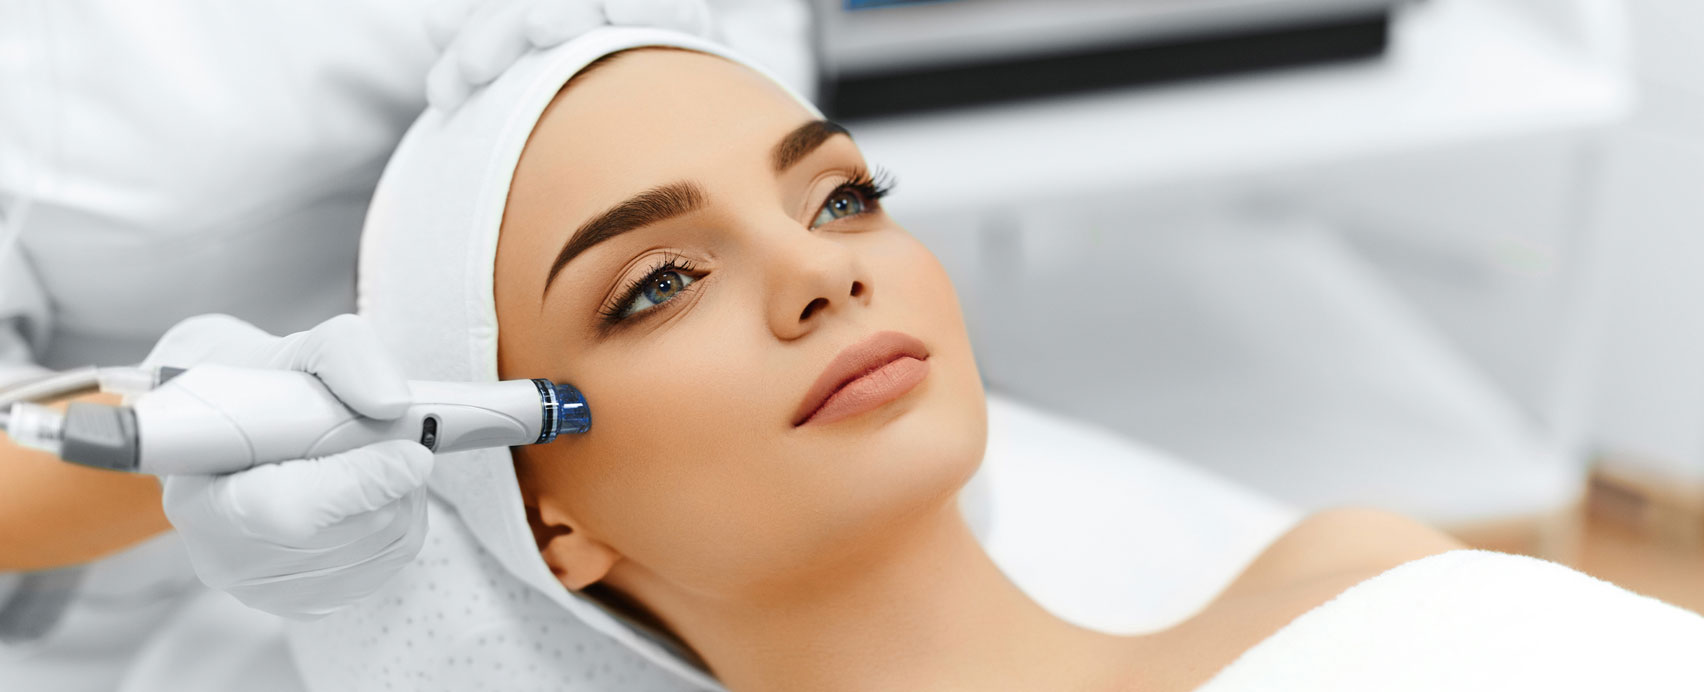 How the hydra facial treatment can benefit both men and women